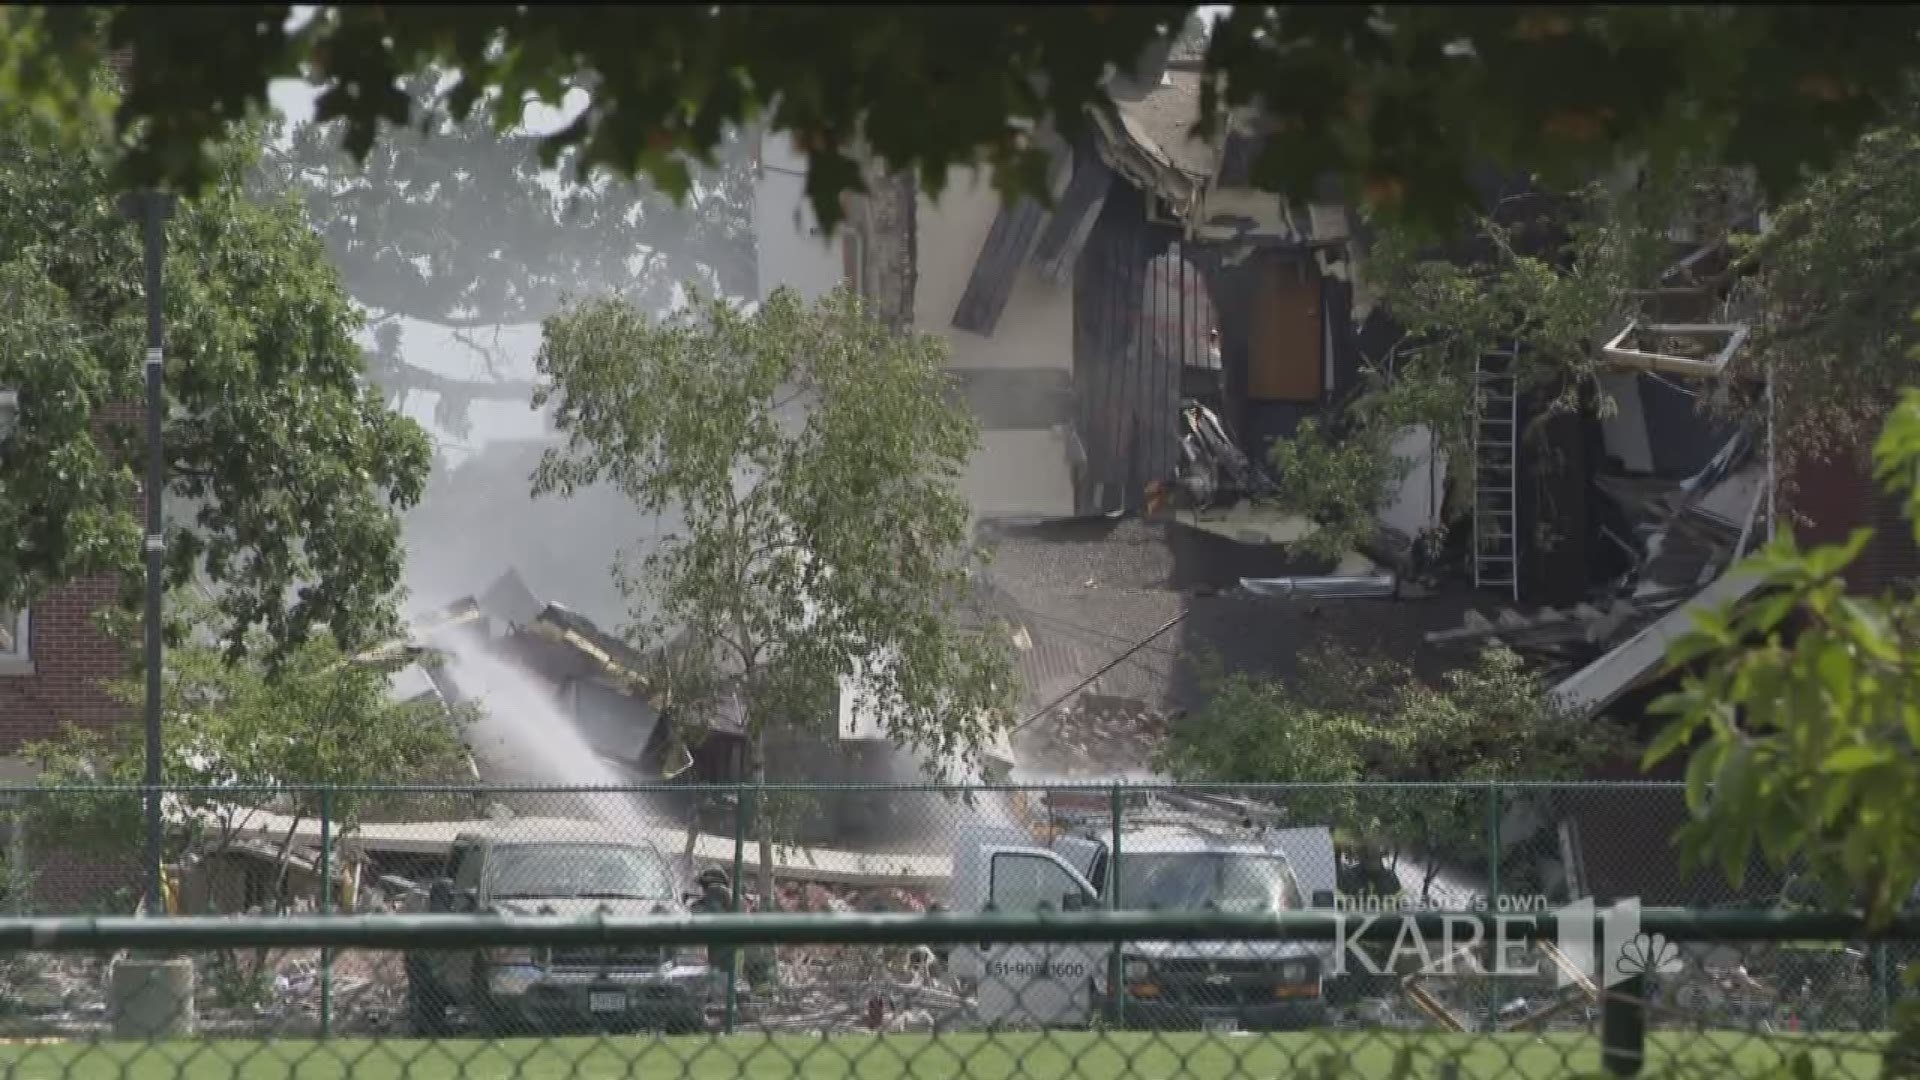 Authorities pulled a second body from the rubble Wednesday night, after a building exploded and collapsed at Minnehaha Academy earlier in the day. http://kare11.tv/2uZRq9r